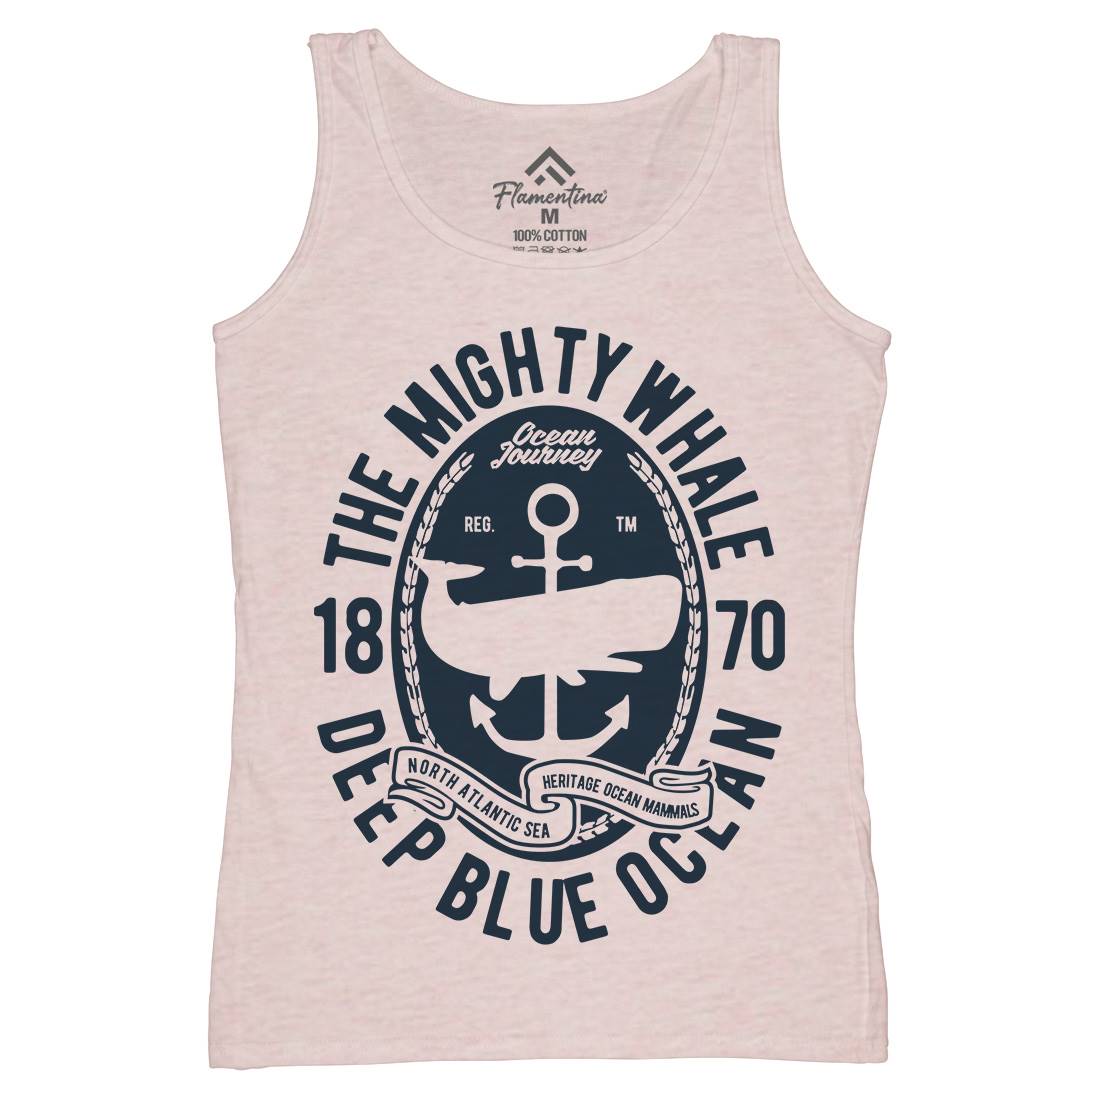 The Mighty Whale Womens Organic Tank Top Vest Navy B466